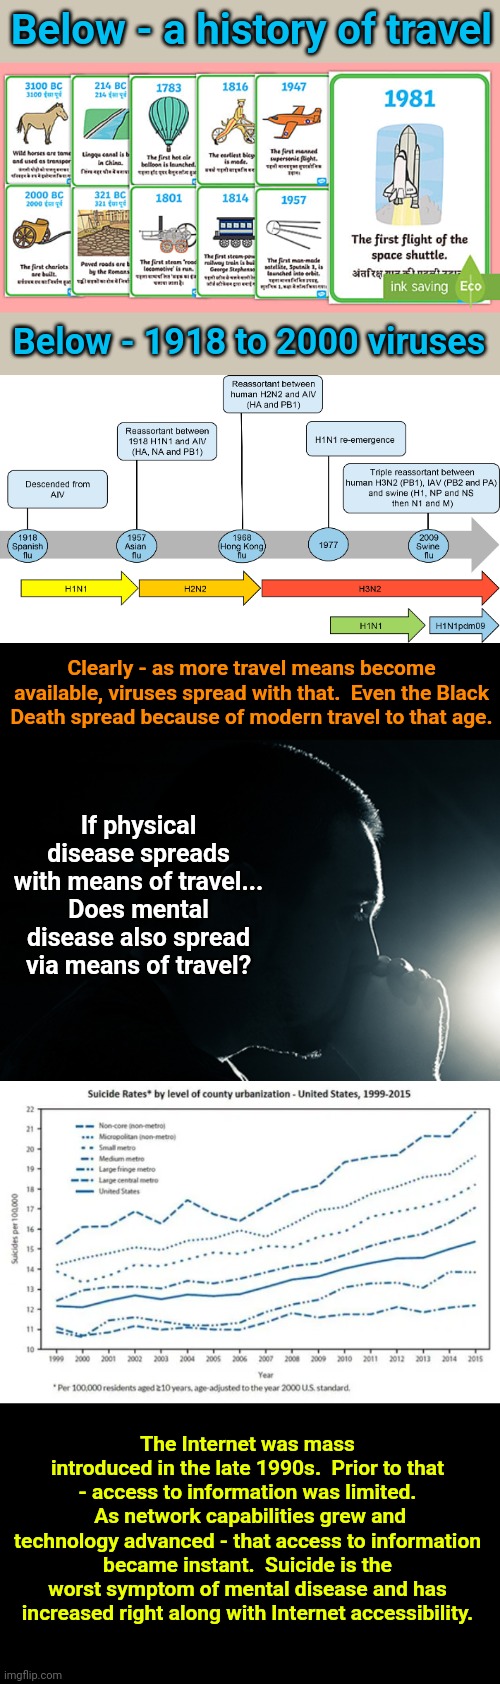 Below - a history of travel; Below - 1918 to 2000 viruses; Clearly - as more travel means become available, viruses spread with that.  Even the Black Death spread because of modern travel to that age. If physical disease spreads with means of travel... Does mental disease also spread via means of travel? The Internet was mass introduced in the late 1990s.  Prior to that - access to information was limited.  As network capabilities grew and technology advanced - that access to information became instant.  Suicide is the worst symptom of mental disease and has increased right along with Internet accessibility. | image tagged in mental illness,had enough,internet,virus,traveling | made w/ Imgflip meme maker